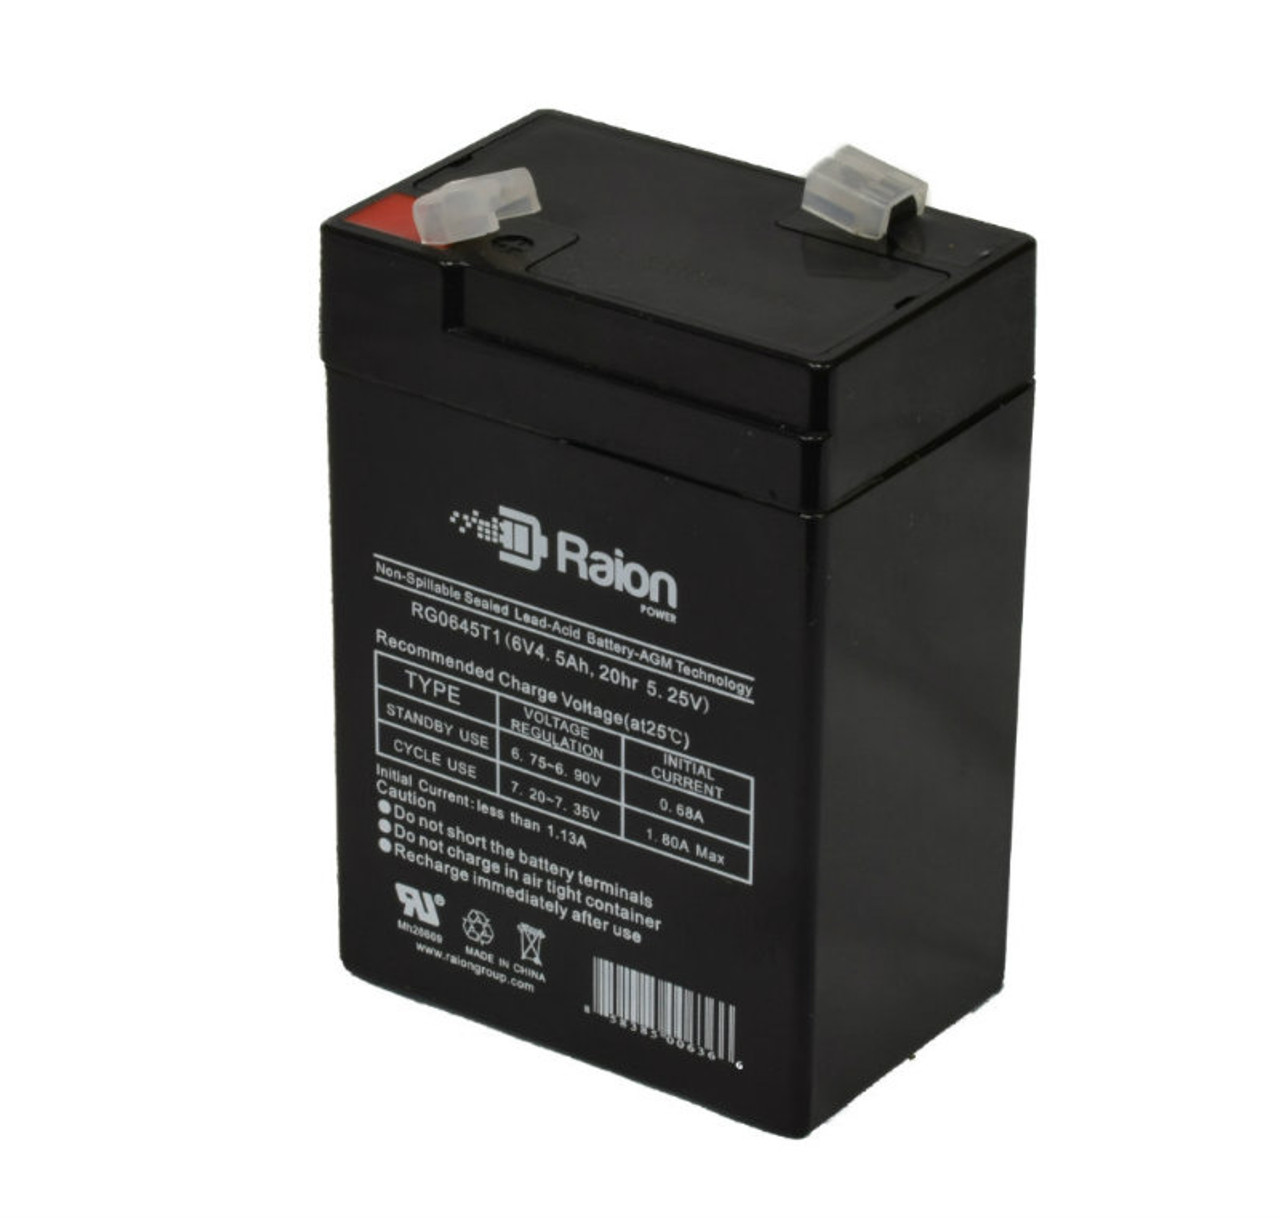 Raion Power RG0645T1 6V 4.5Ah Replacement Battery Cartridge for Mule GC640EXIT